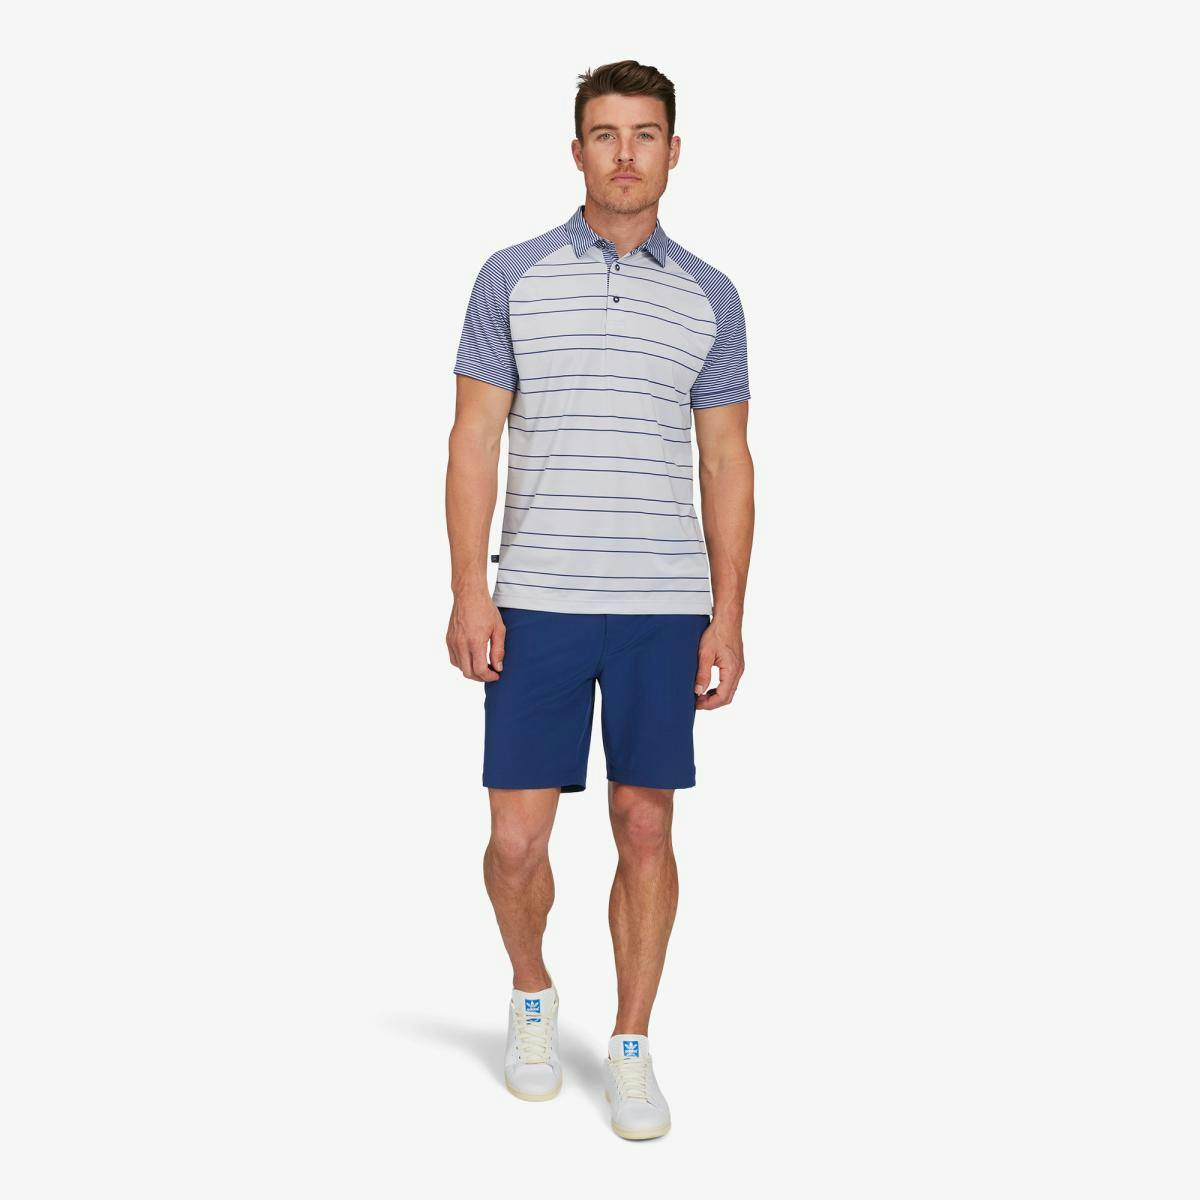 Versa Clubhouse Polo - Product Image 2